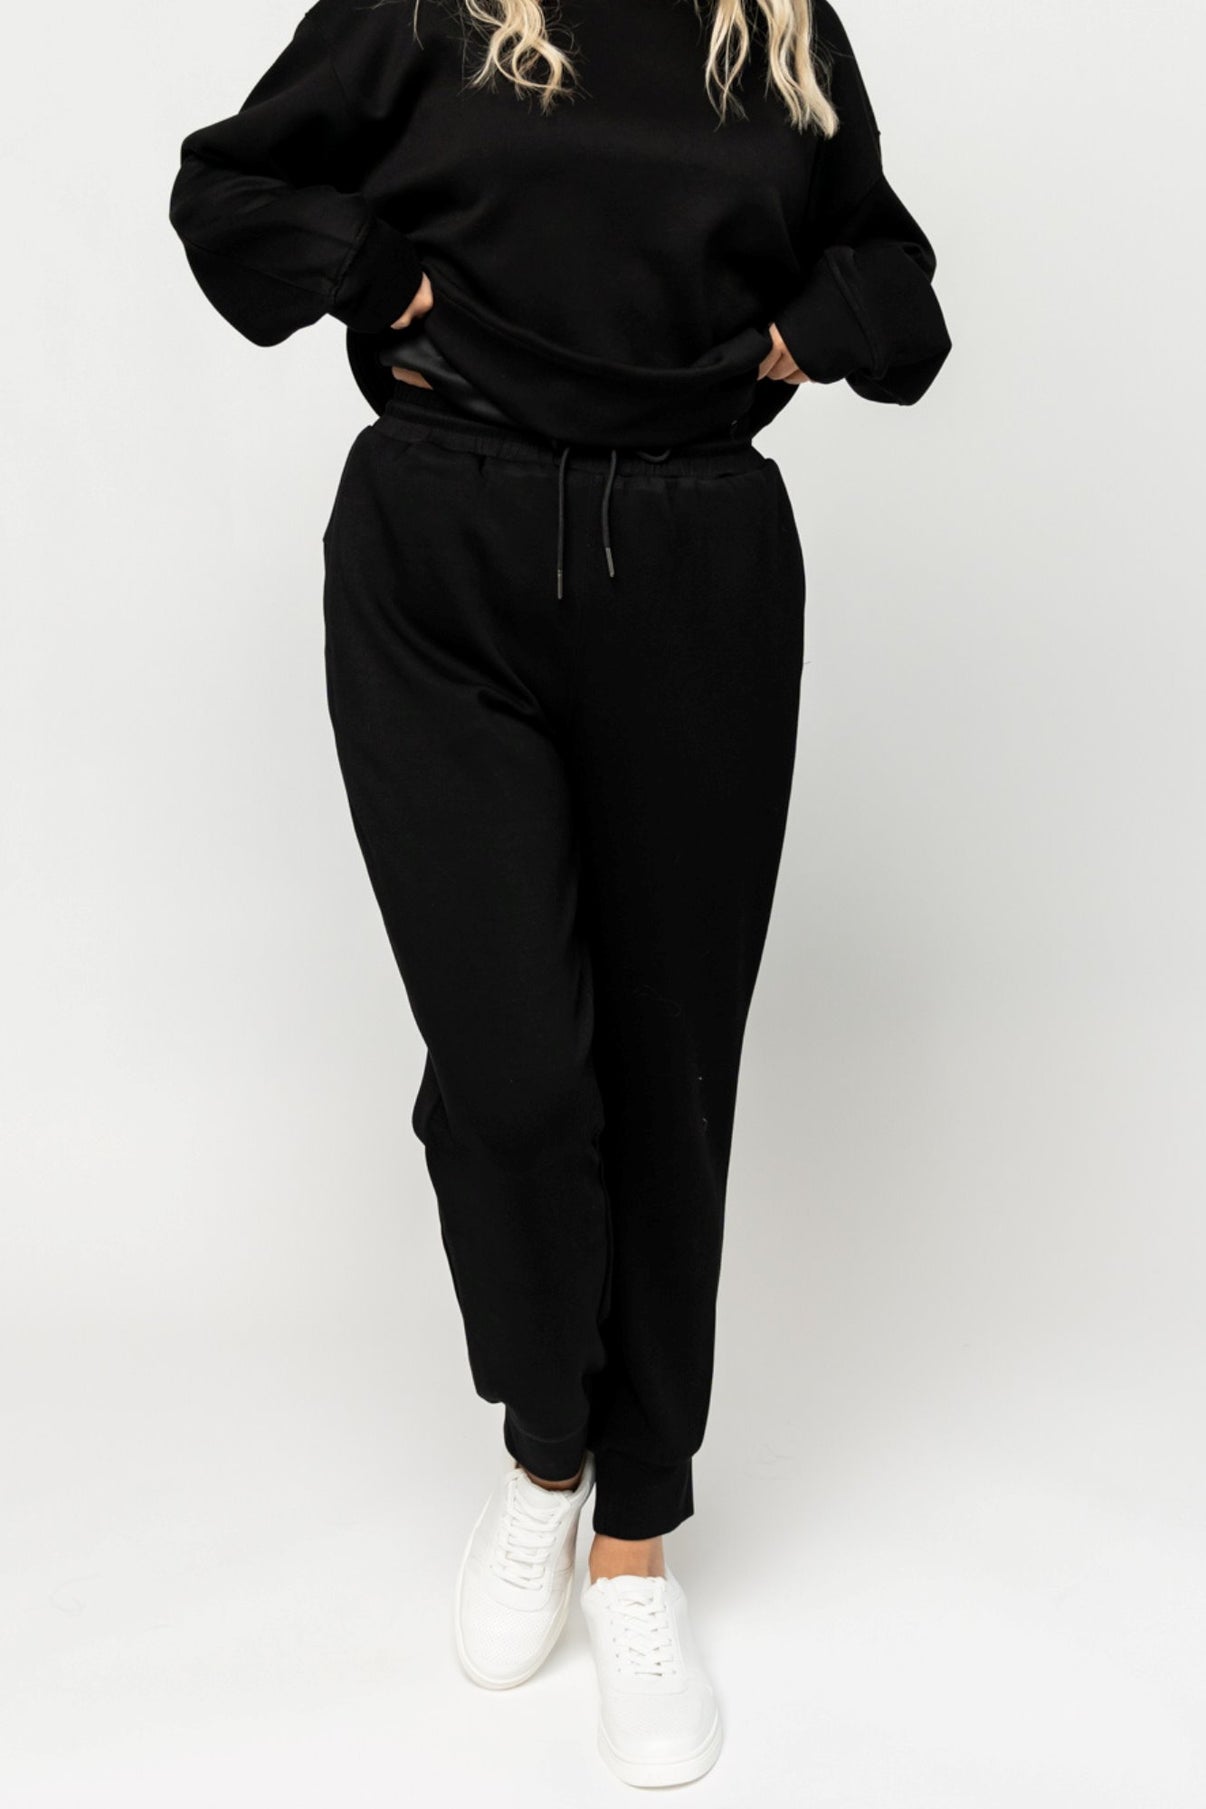 HOLLEY GIRL - Knox Joggers in Black – Holley Girl